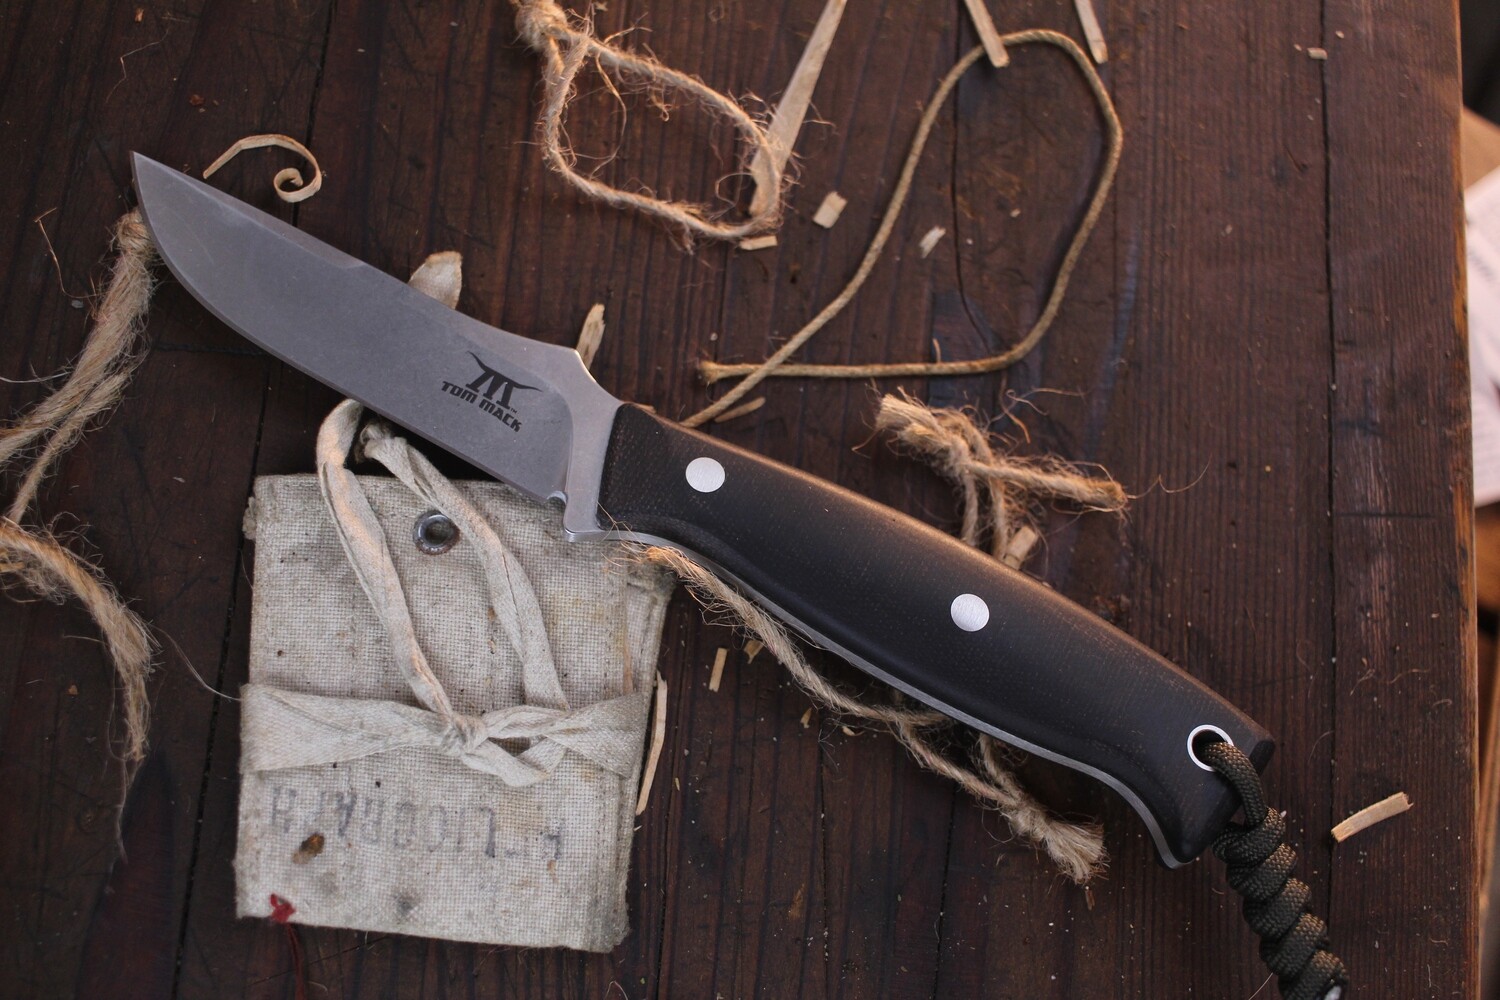 White River Knives Tom Mack Hunt 4" Fixed Blade Knife / Black Canvas Micarta / Stonewashed CPM-S35VN ( Pre Owned )